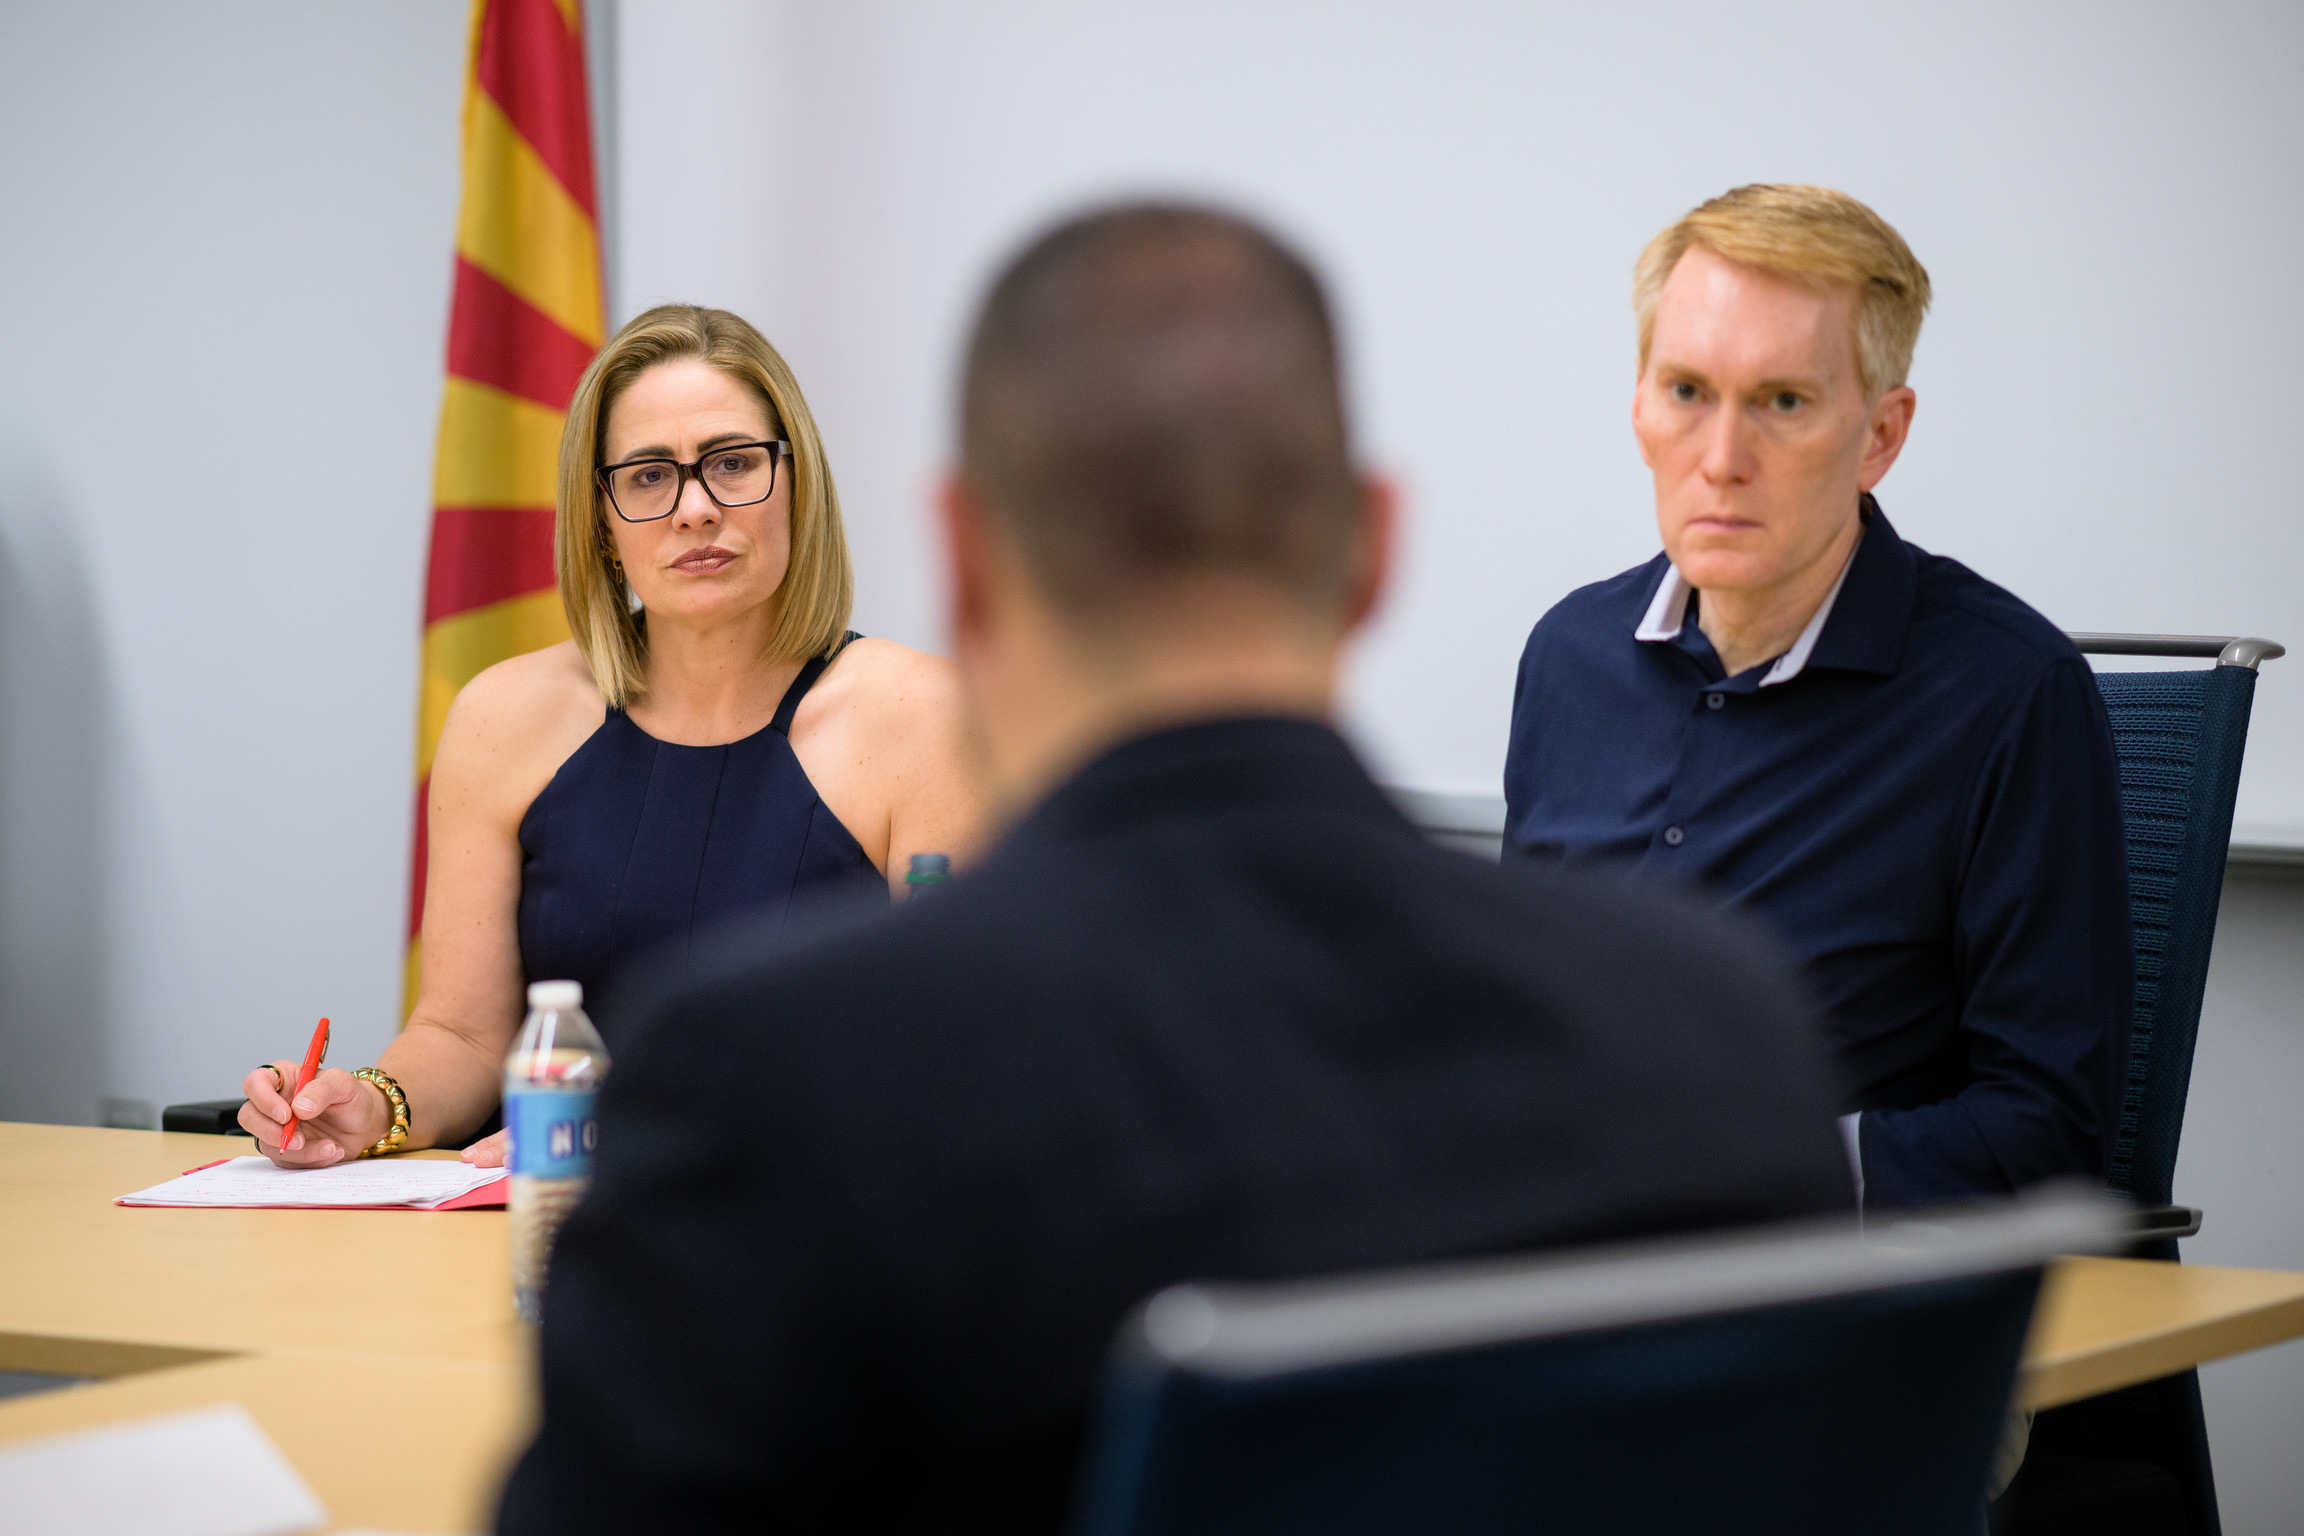 Sinema & Lankford Hear from Arizona Local Community Leaders on Challenges Following Title 42 Termination